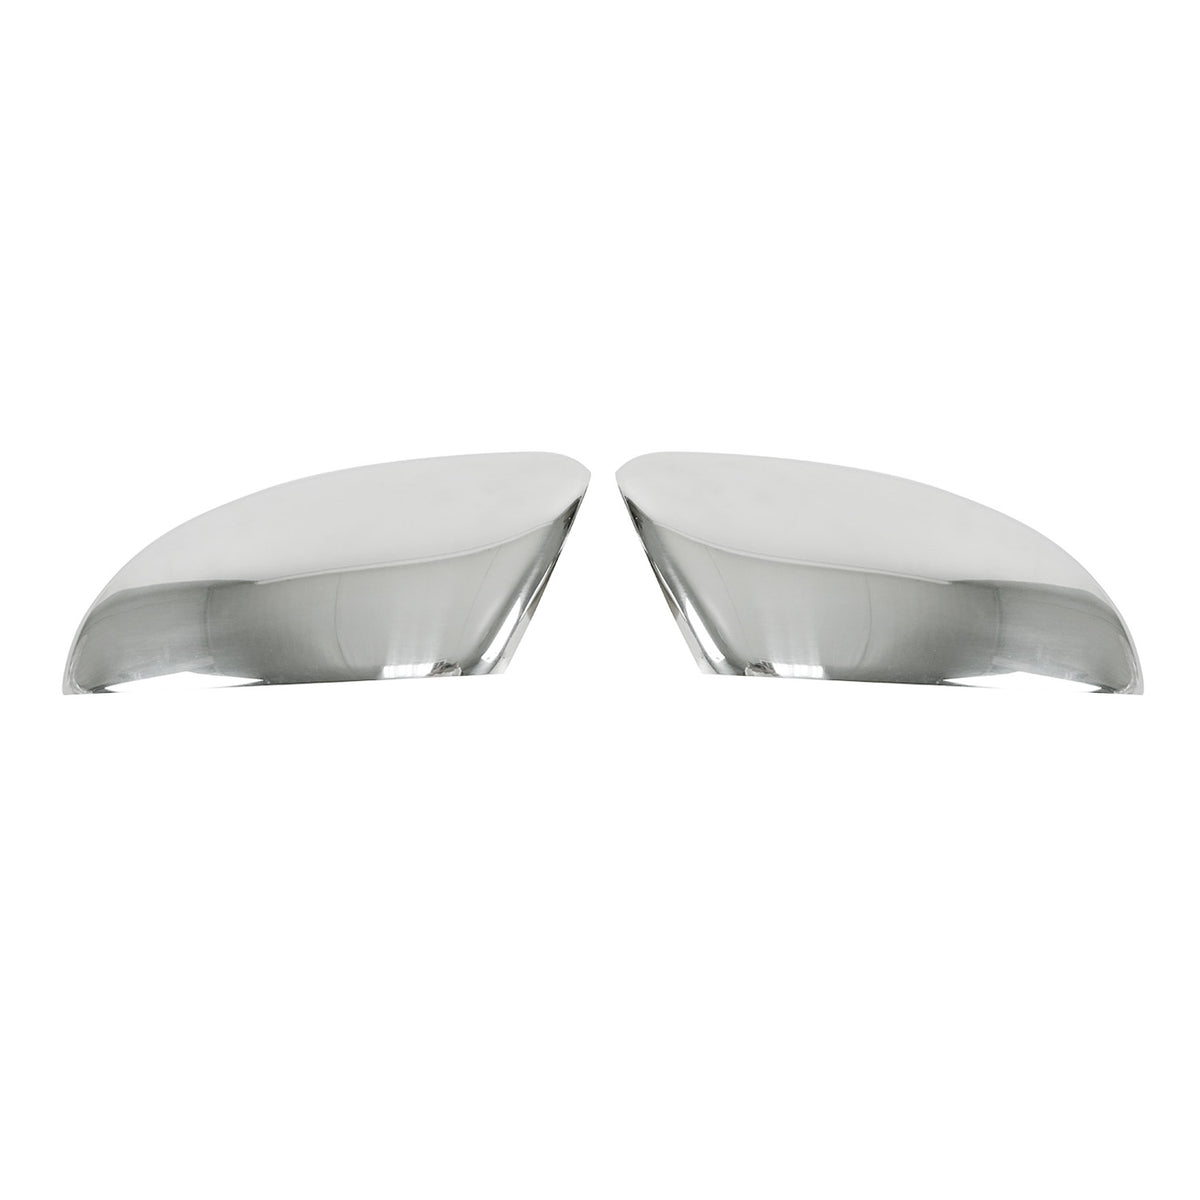 Mirror caps mirror cover for VW Beetle 2011-2019 stainless steel silver 2 pieces